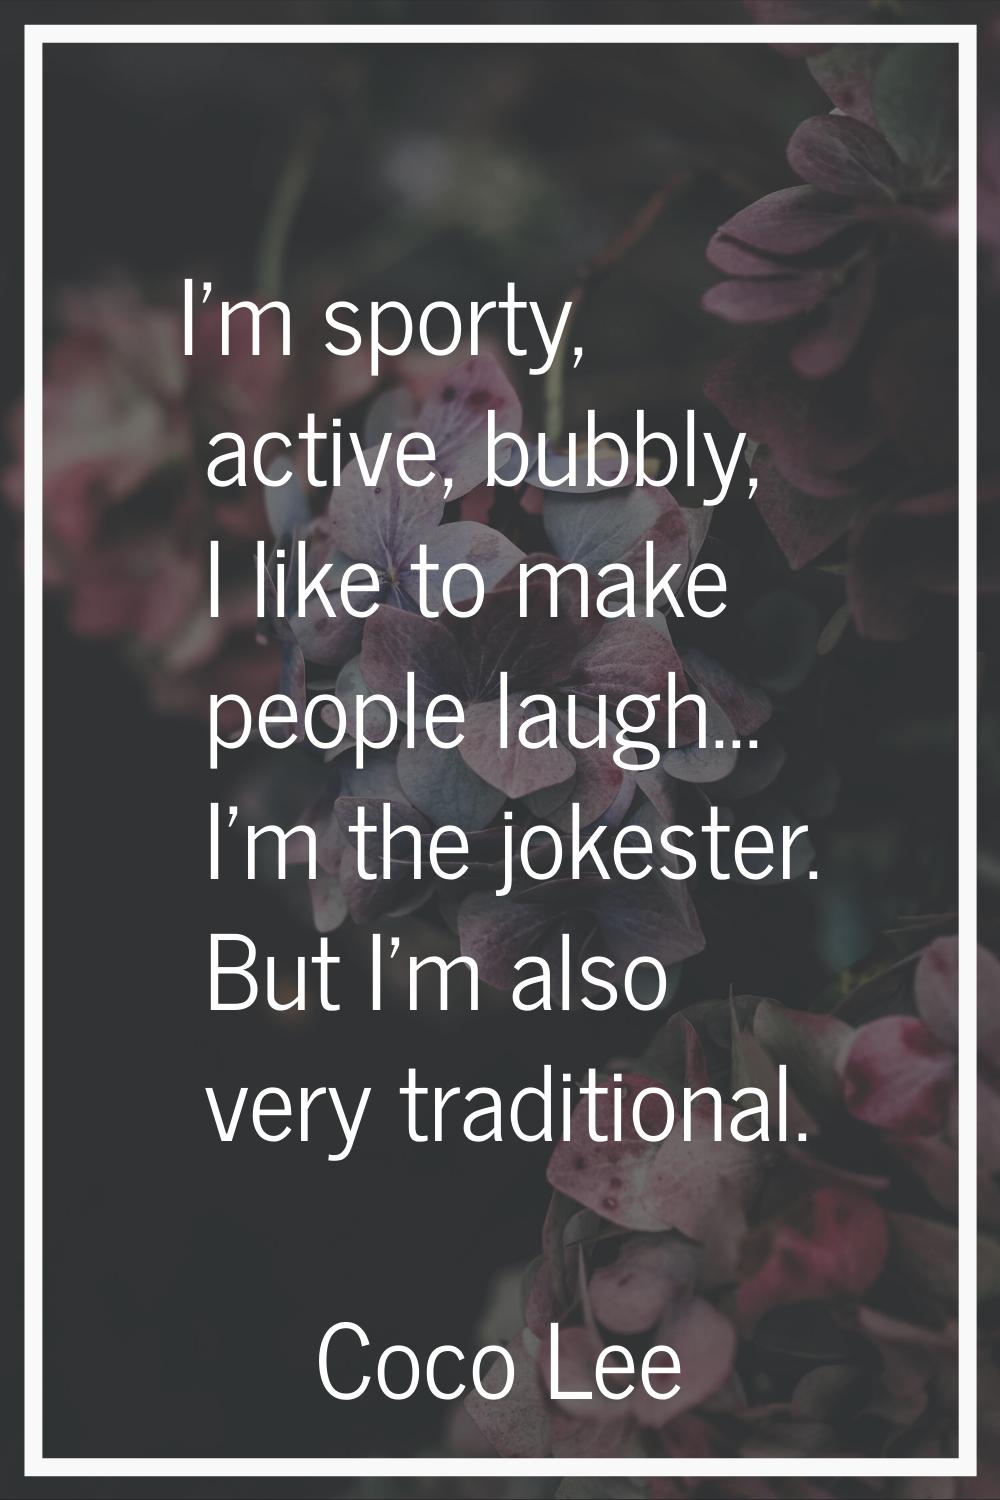 I'm sporty, active, bubbly, I like to make people laugh... I'm the jokester. But I'm also very trad